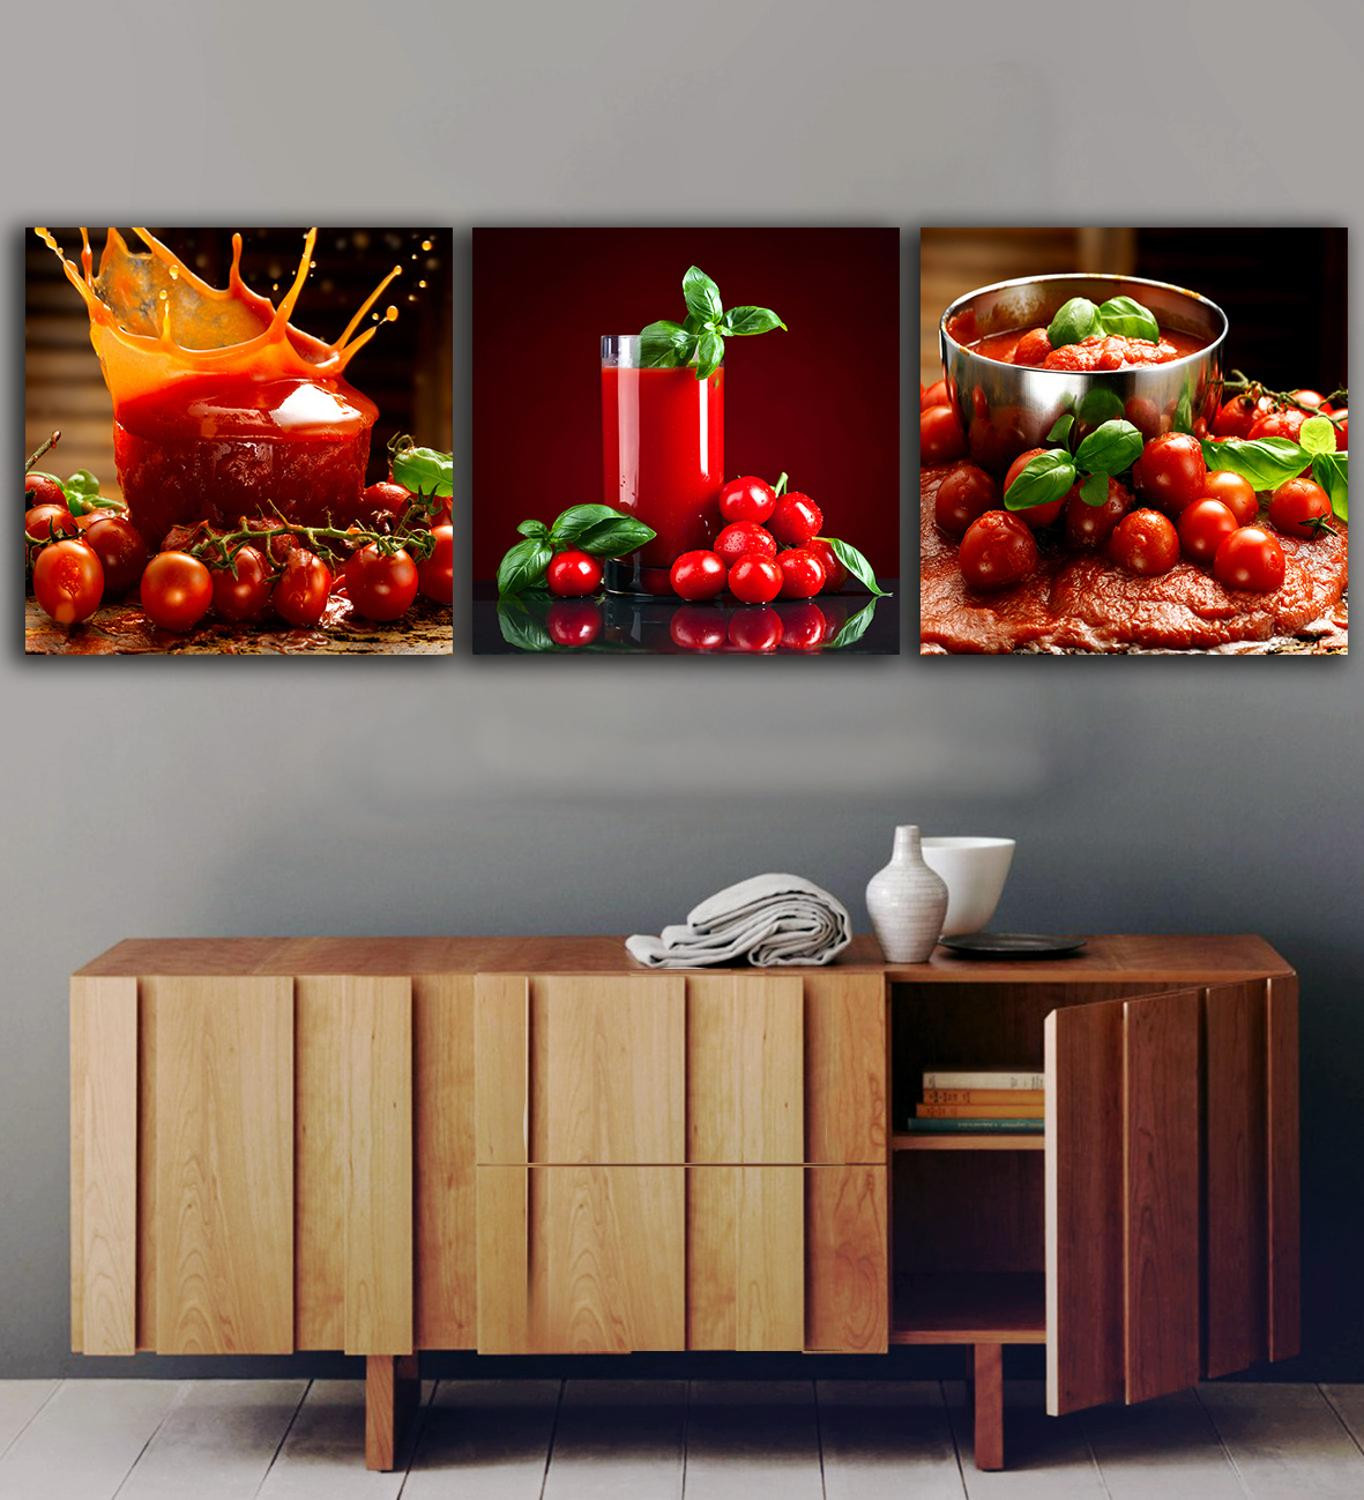 Fruit Wall Art Kitchen
 3 Panels Tomatoes Juice paintings for the kitchen fruit